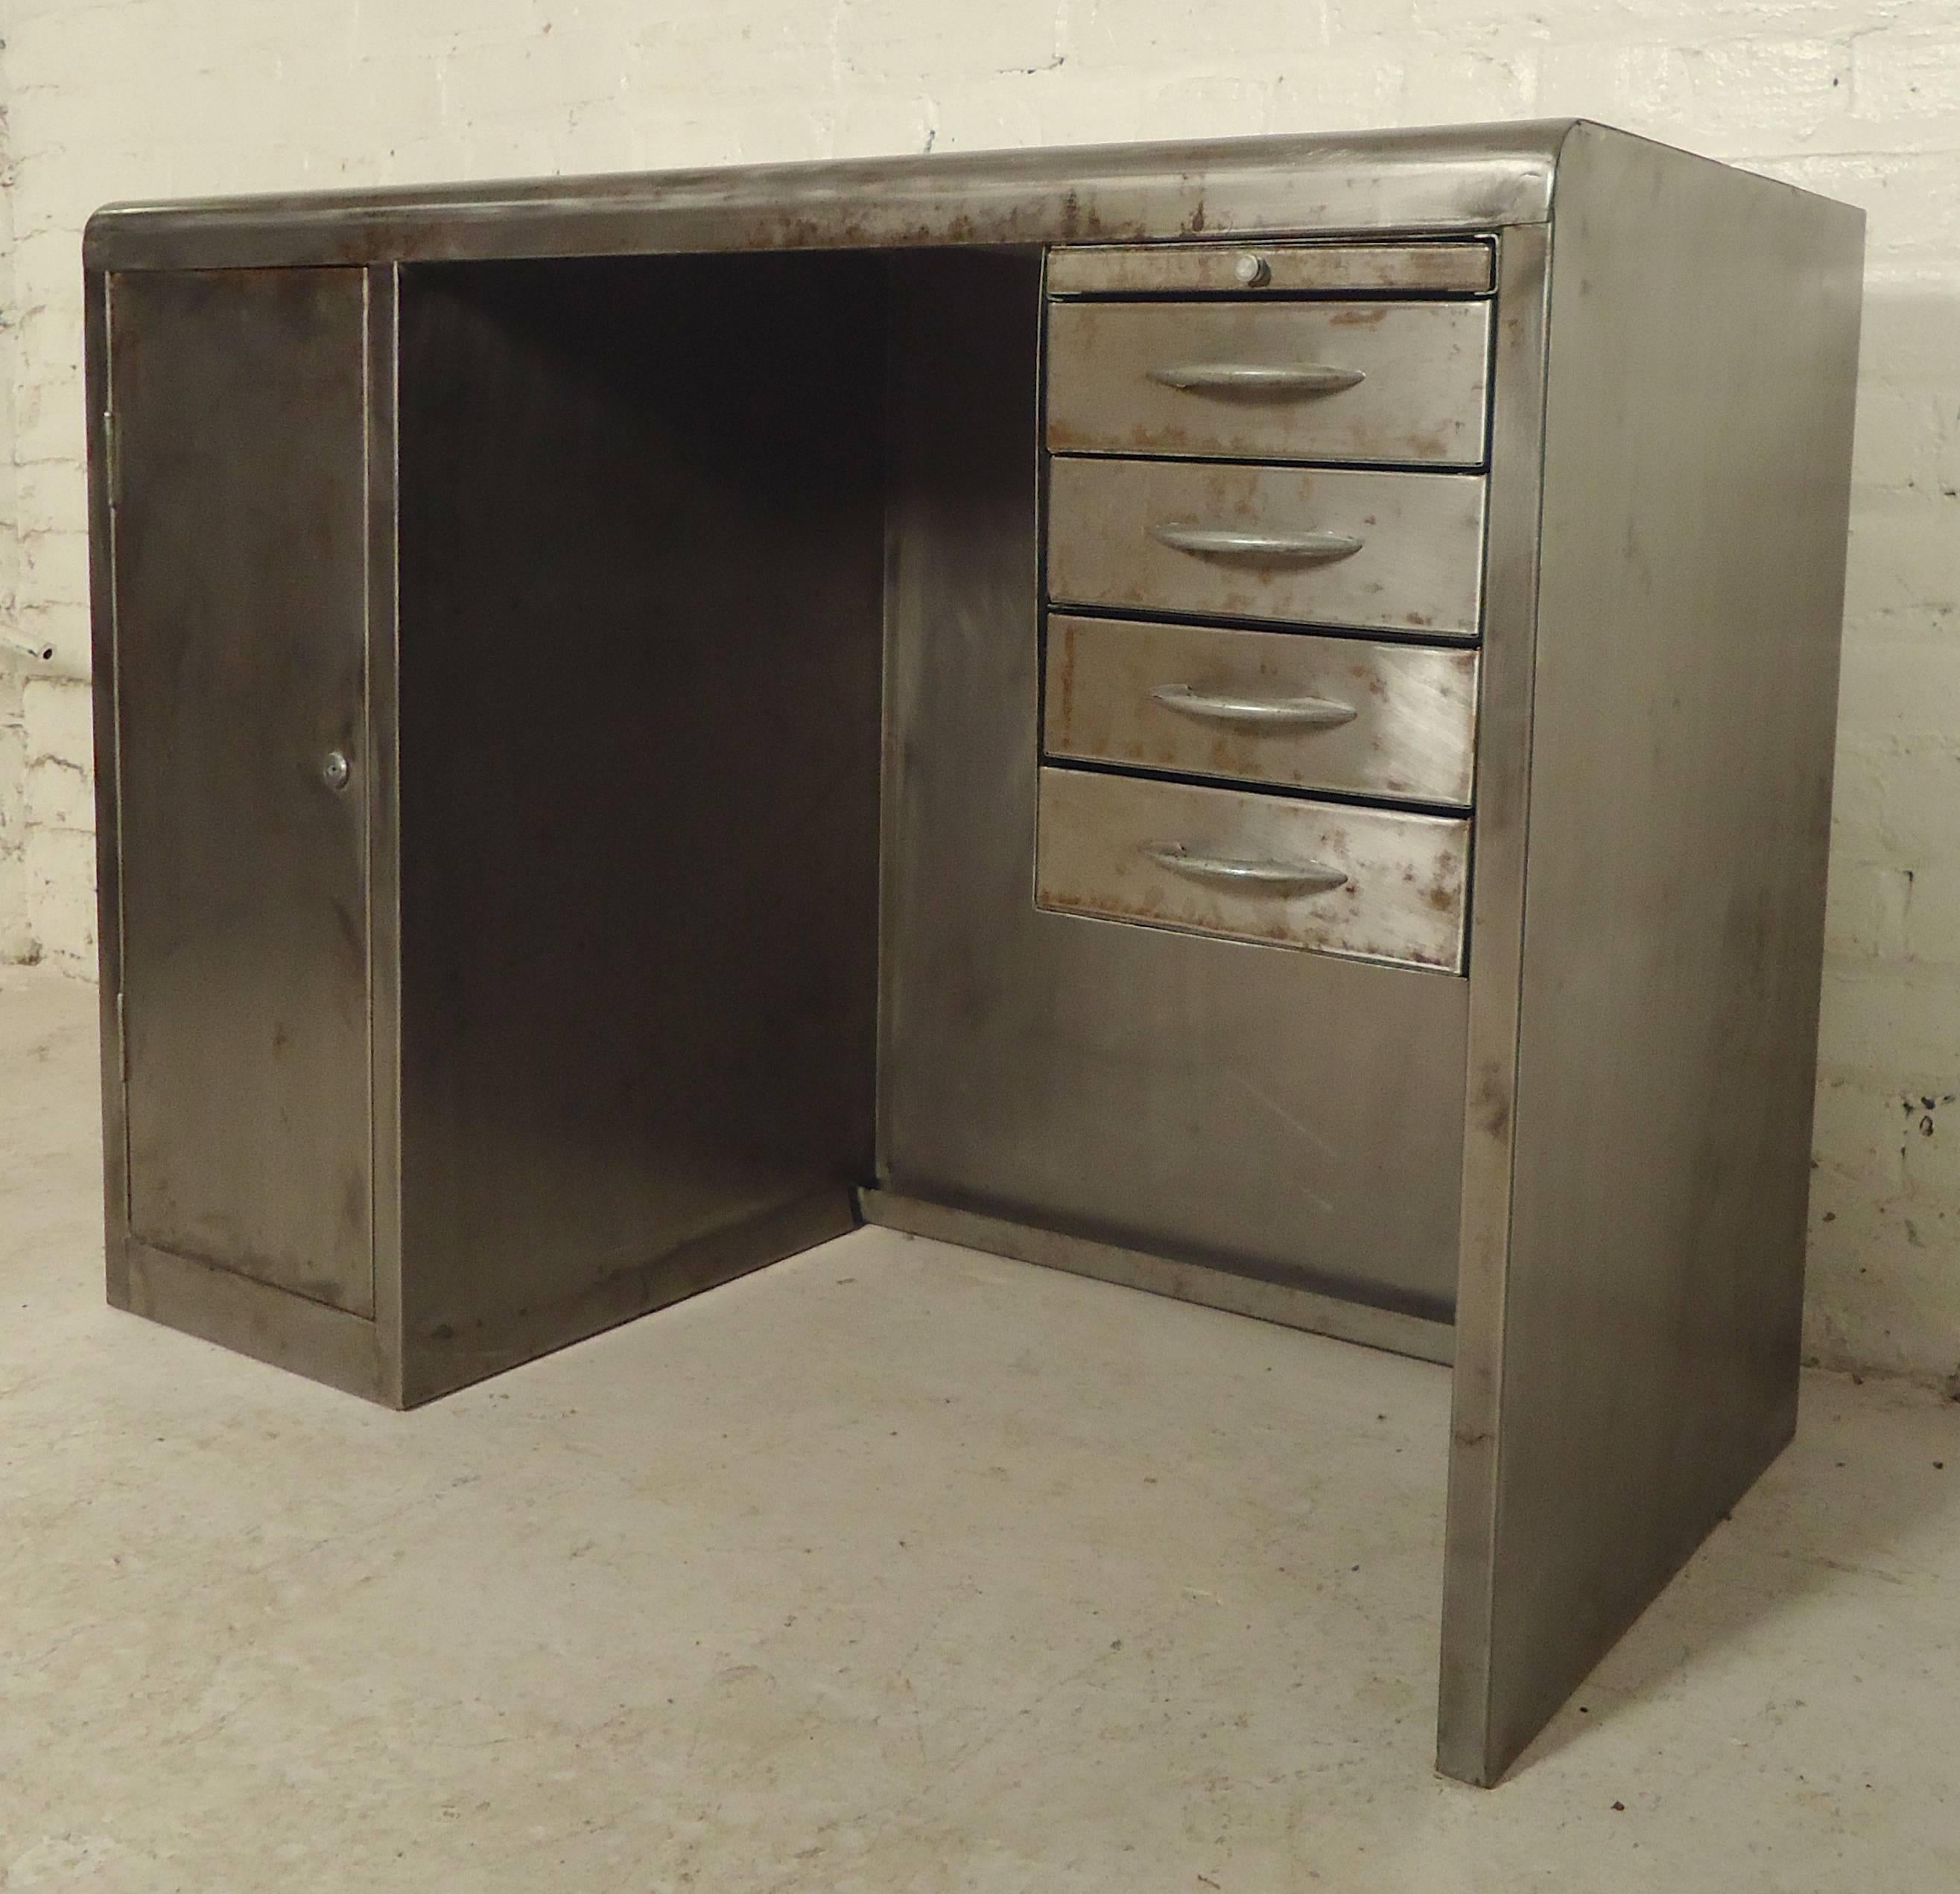 Miniature metal desk refinished in an Industrial base metal style. Long left side cabinet and small right side drawers. Great for children's room or tight loft living.
Kneehole measures: 17.5